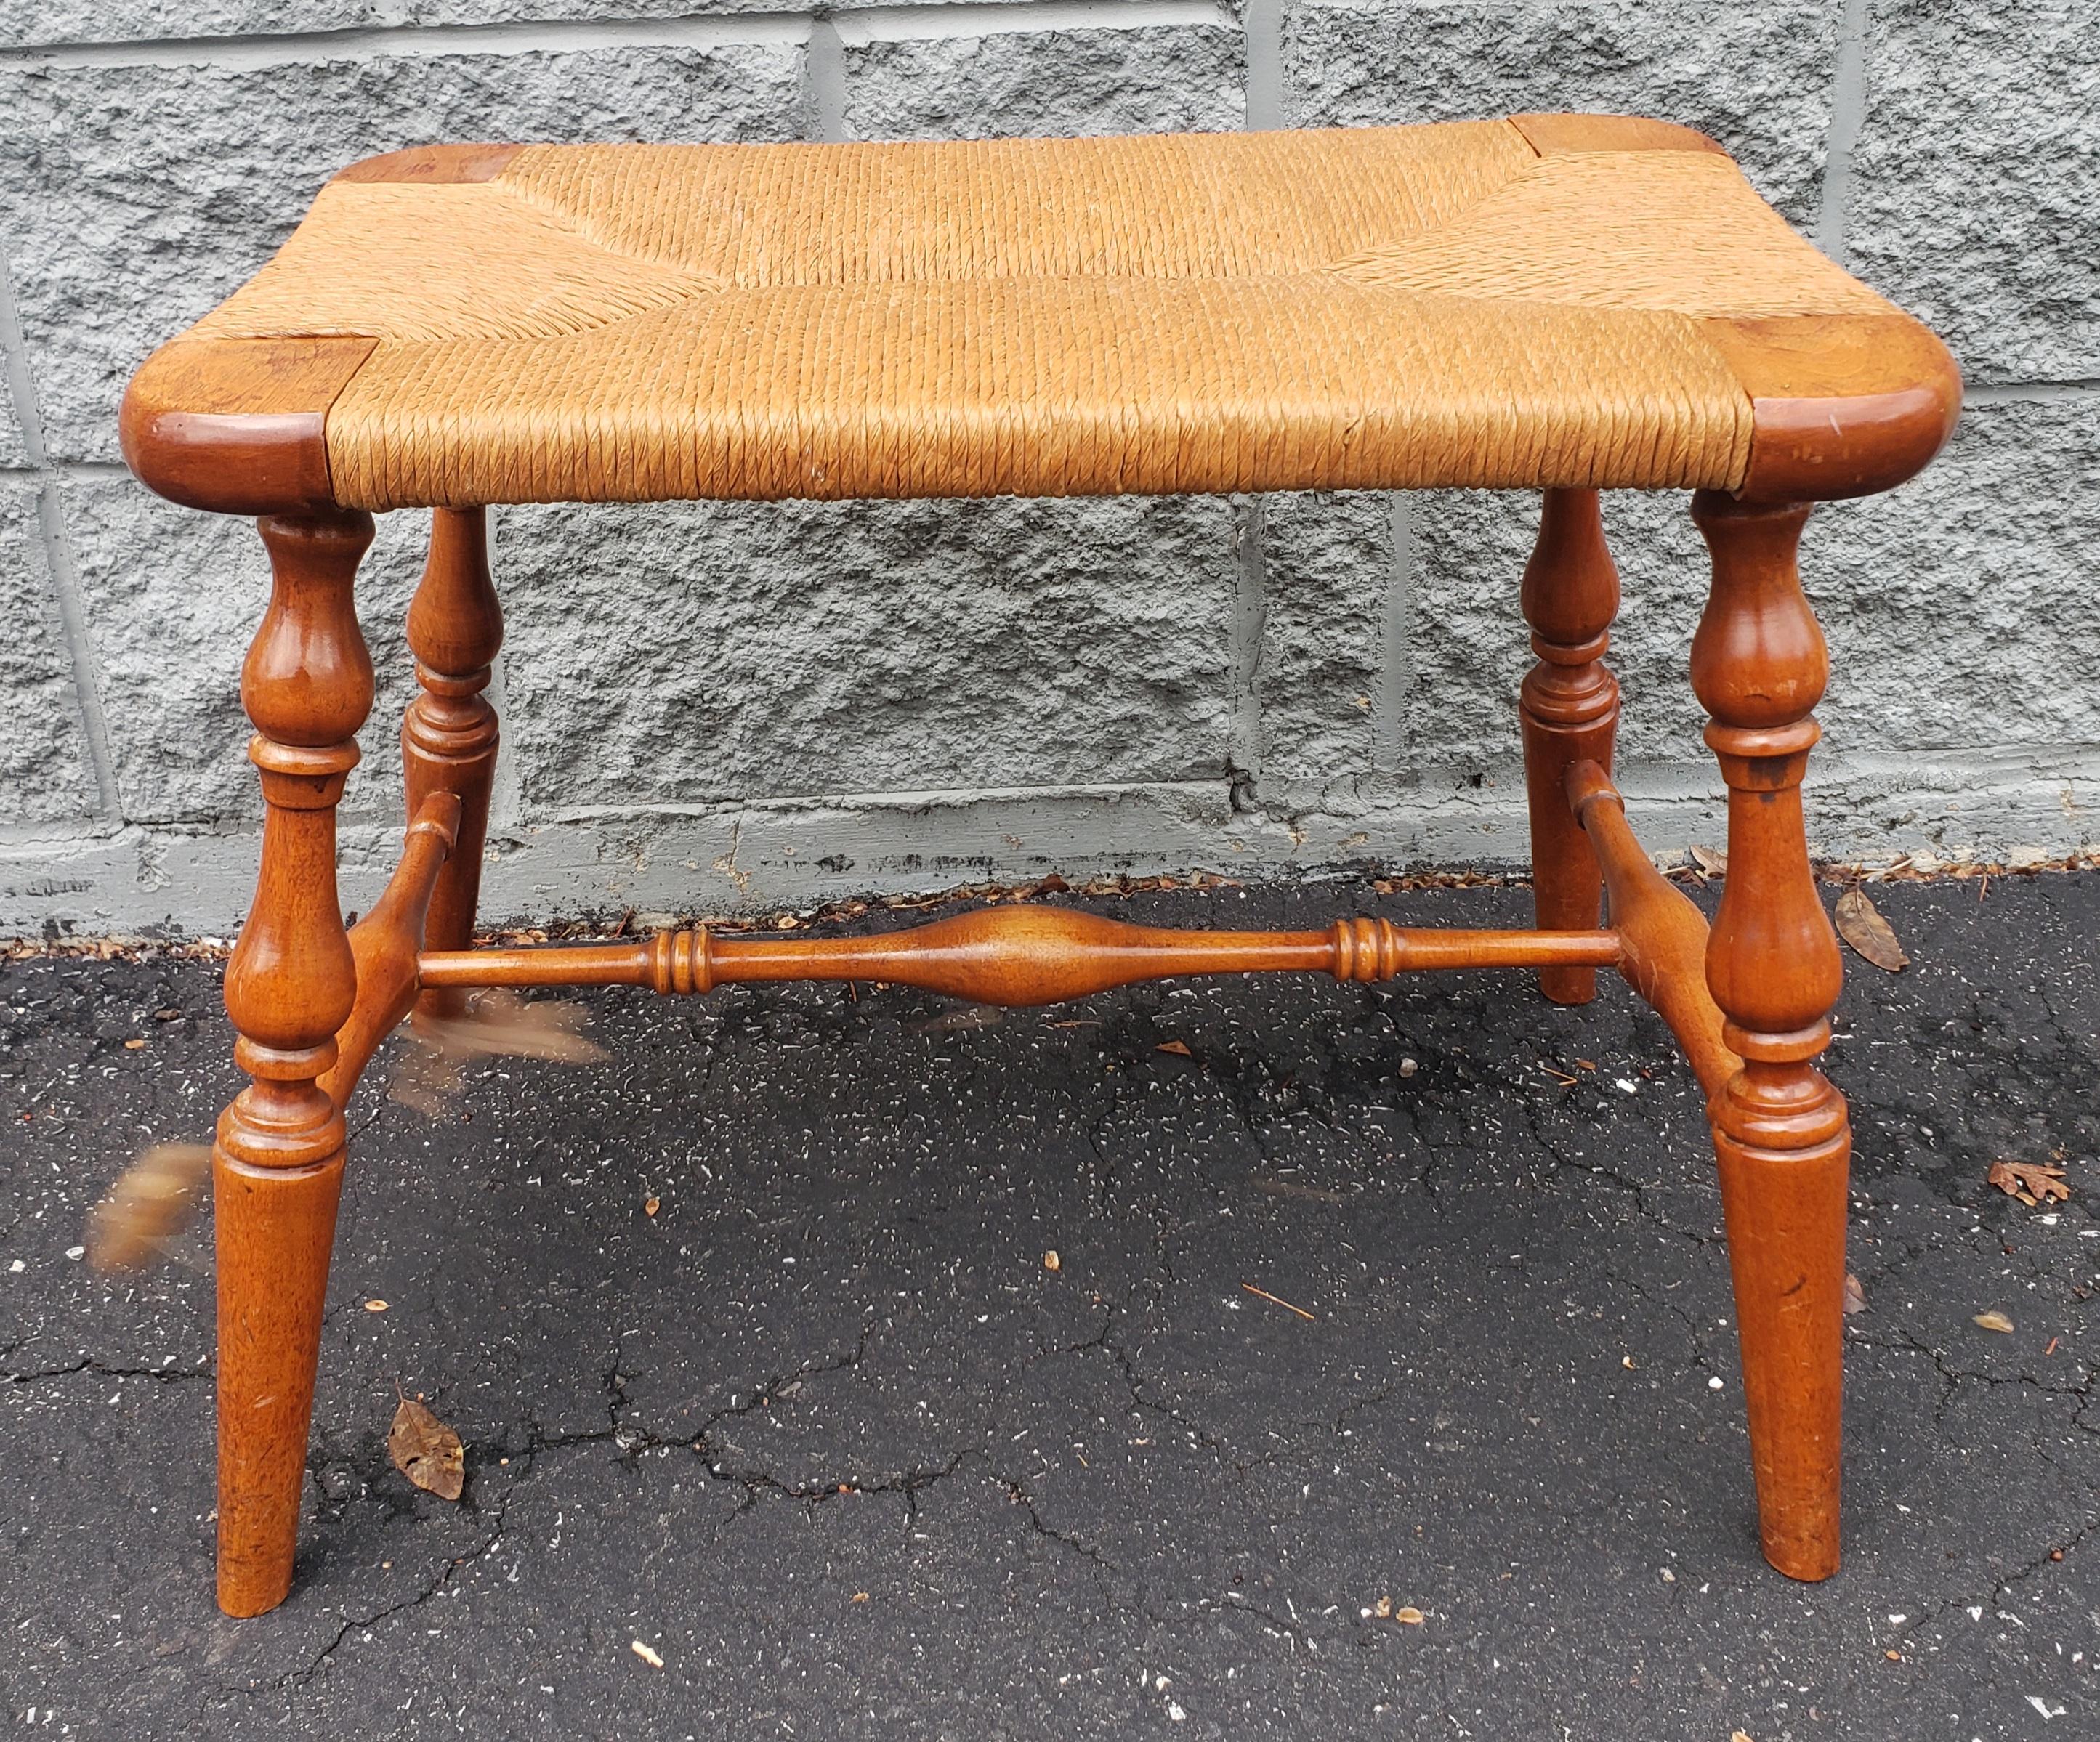 Very well maintained midcentury Turned Maple and Seat Seat Bench in very good vintage condition.